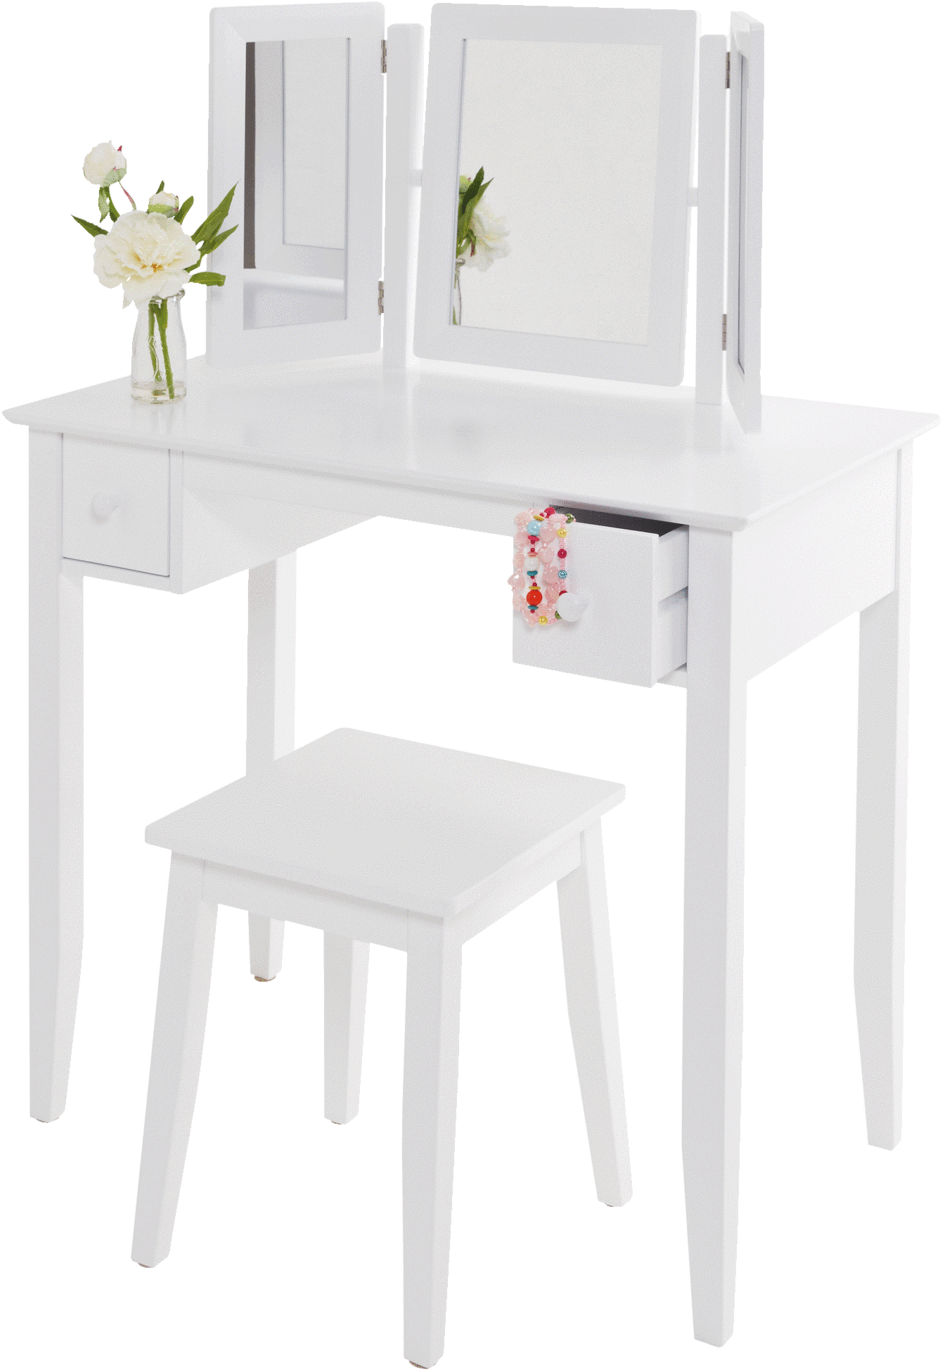 White Vanity Setwith Stooland Mirror PNG